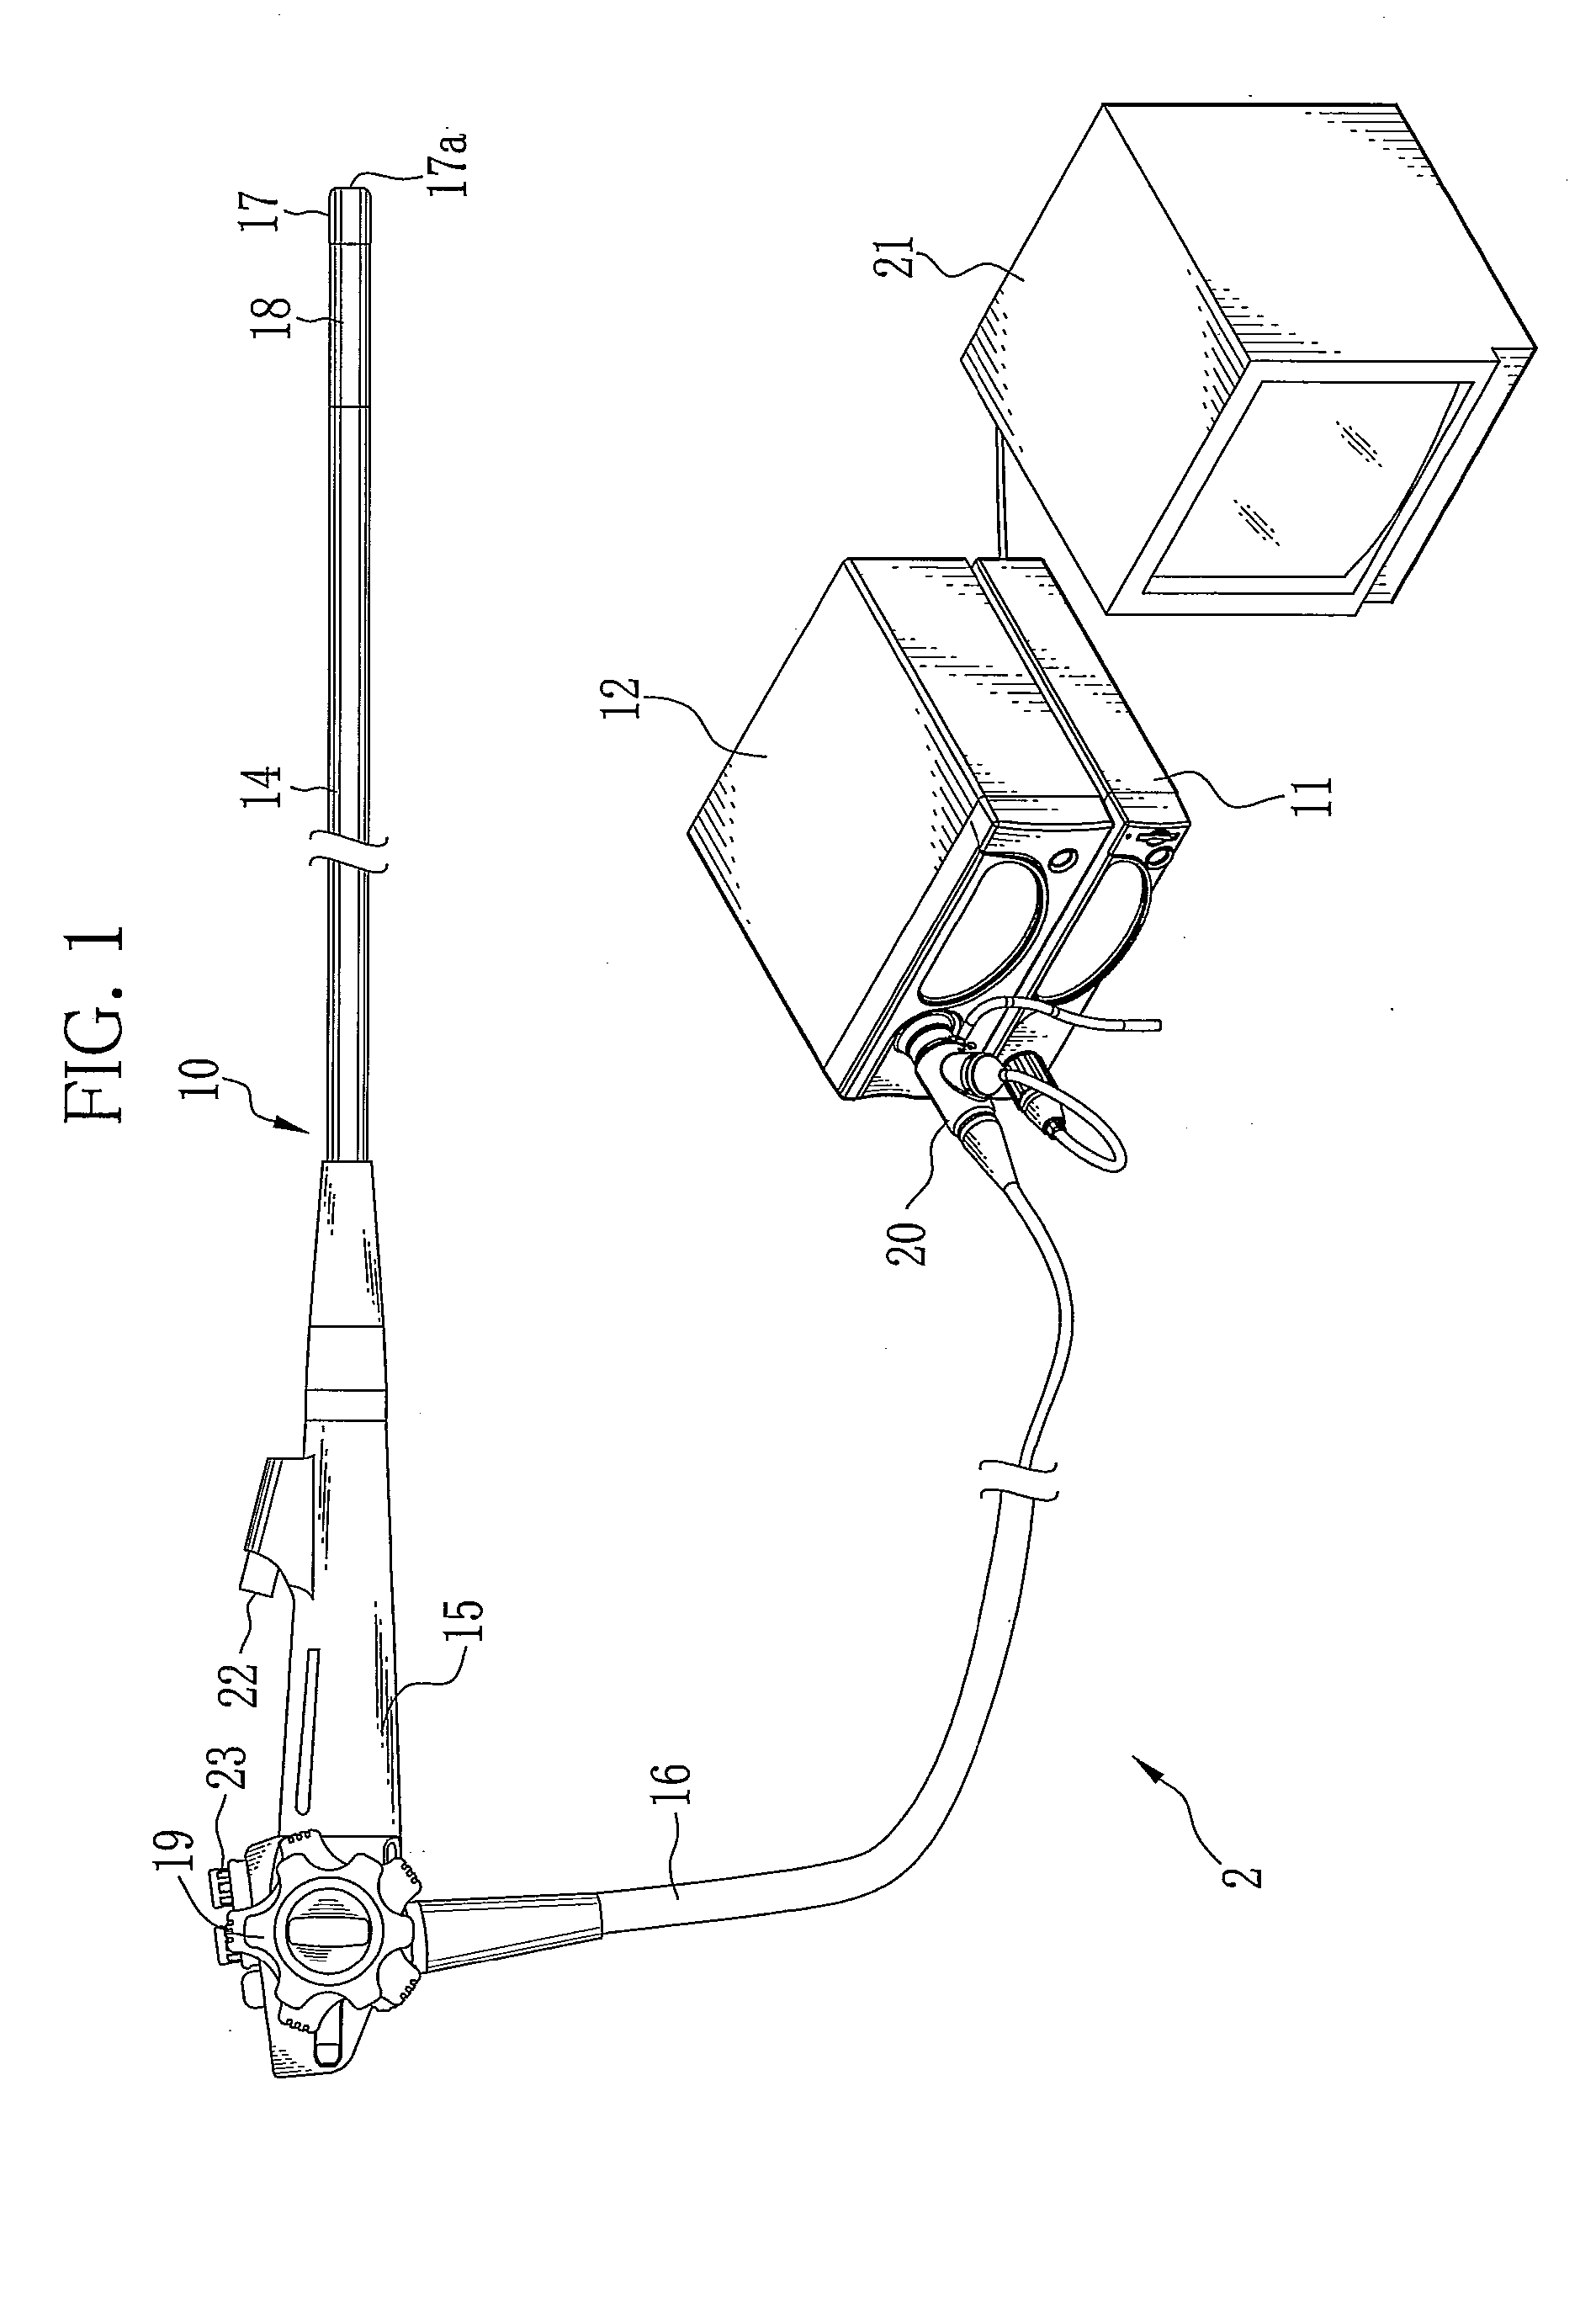 Electronic communication system and endoscope system